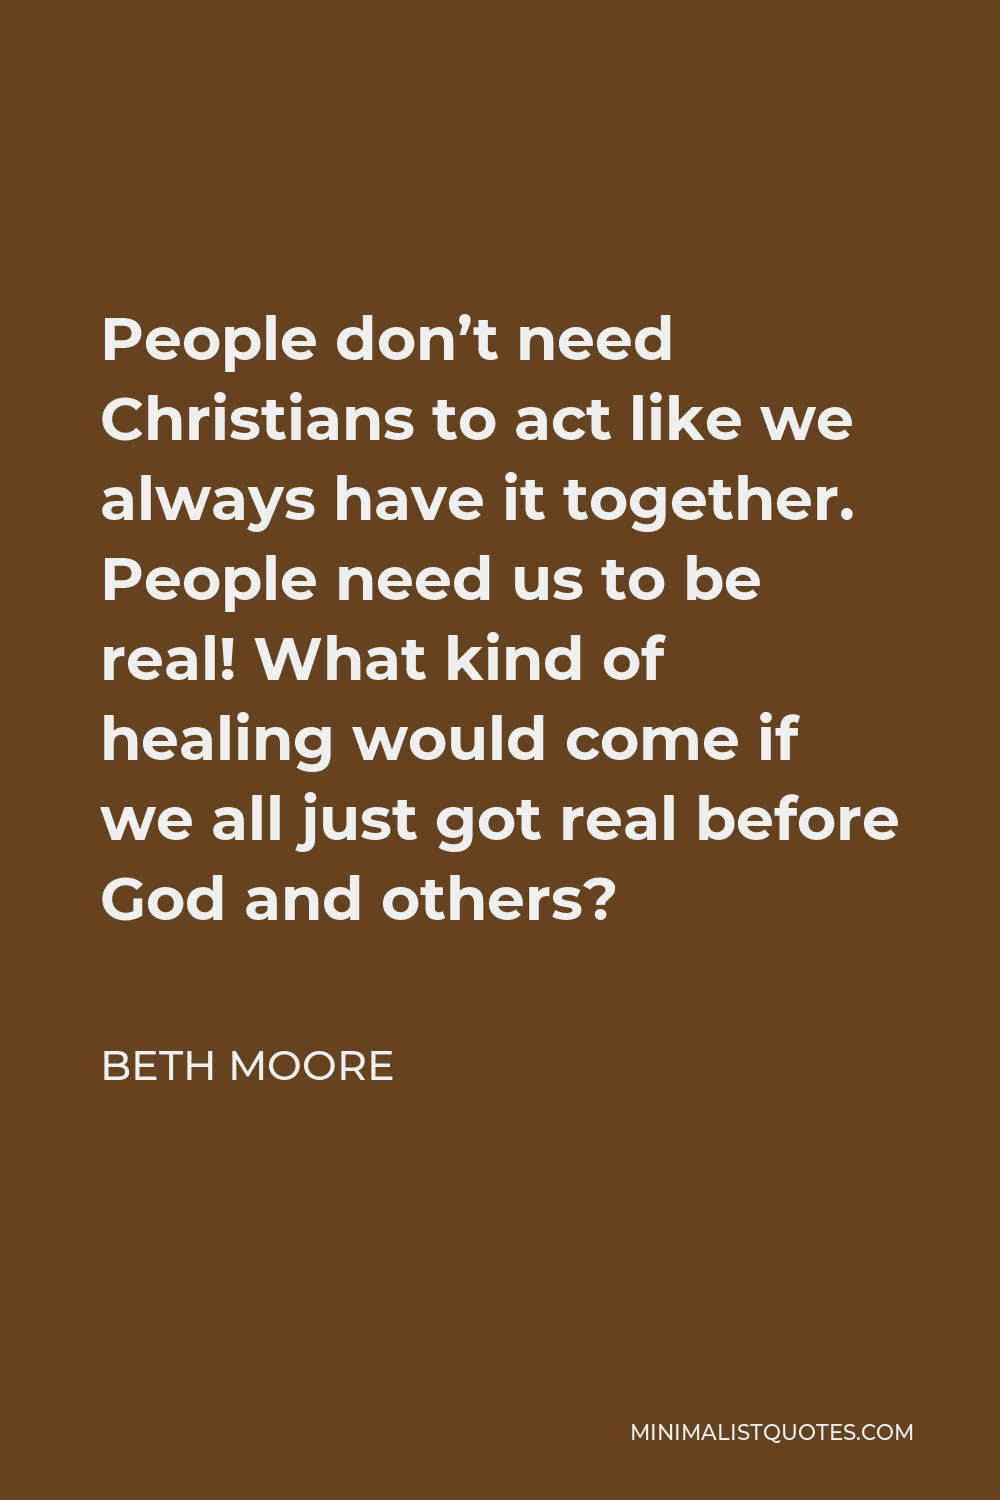 Beth Moore Quote - People don’t need Christians to act like we always have it together. People need us to be real! What kind of healing would come if we all just got real before God and others?